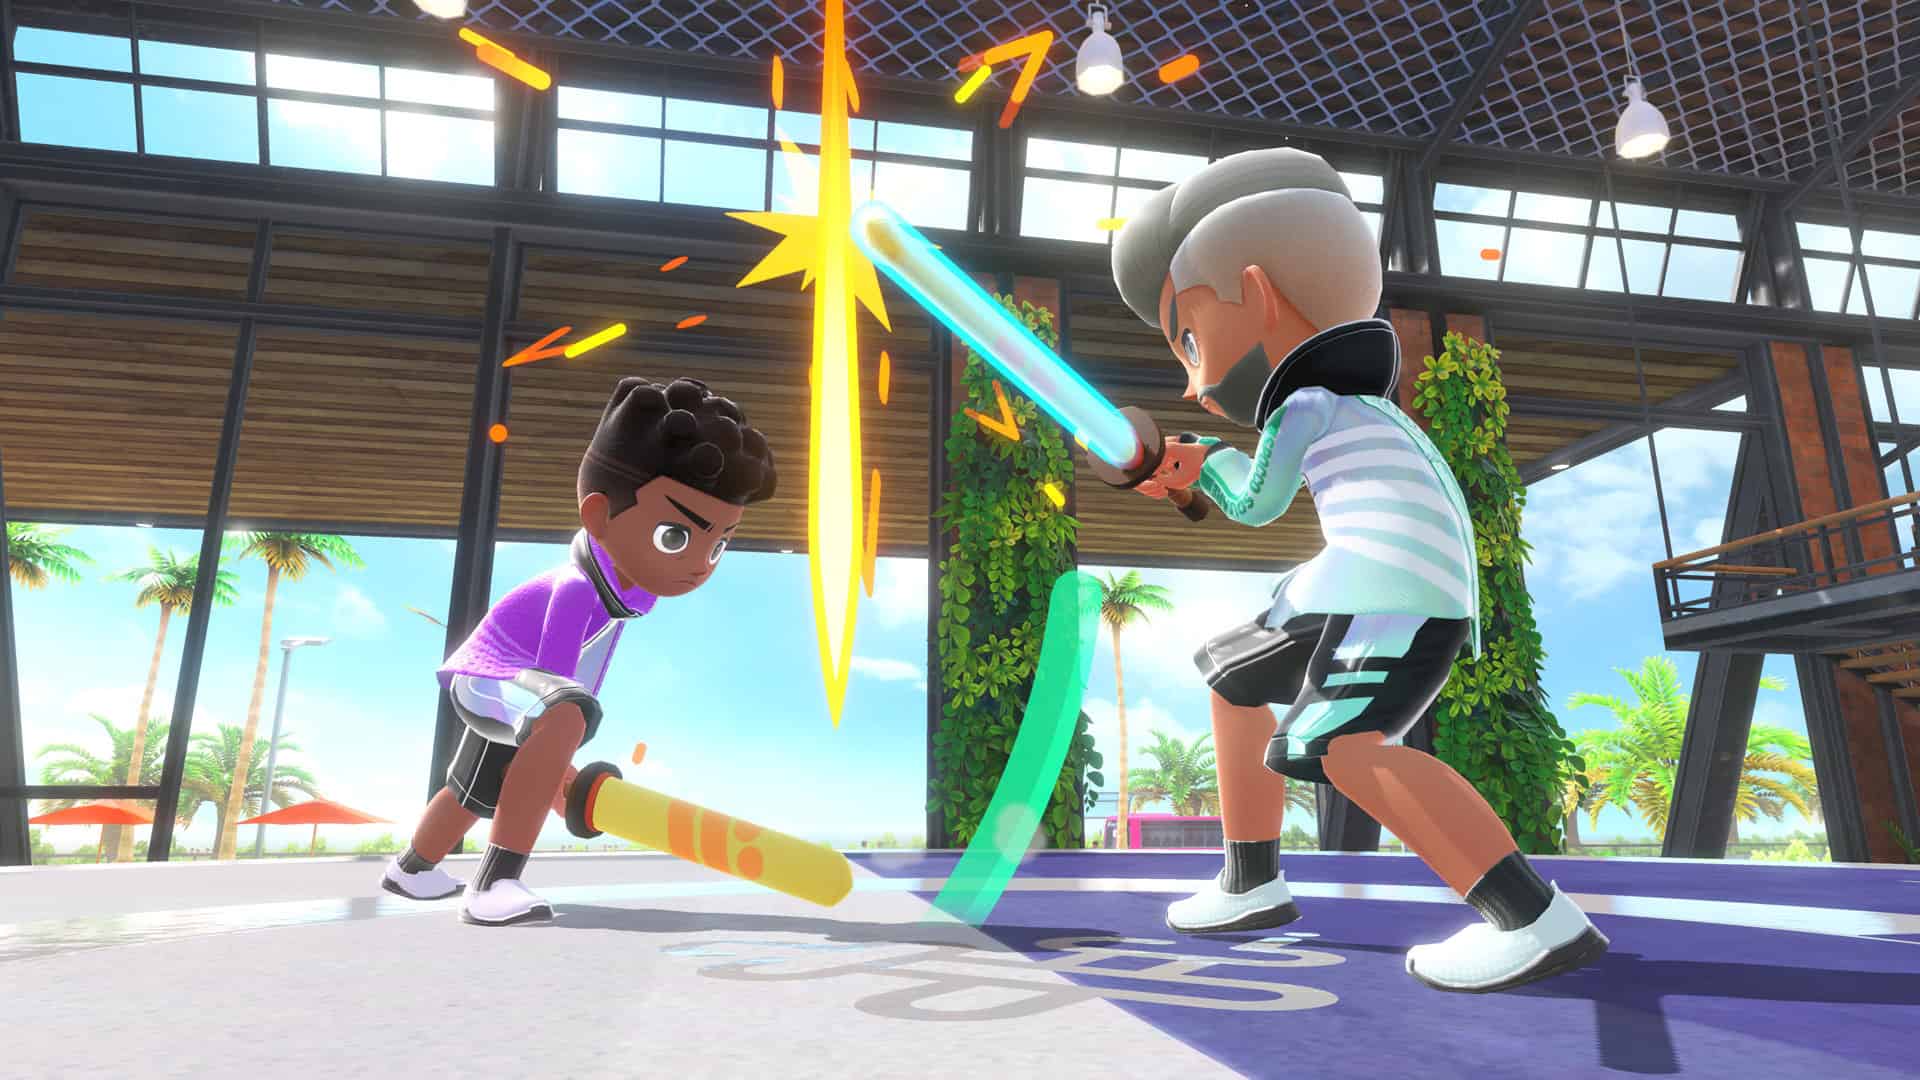 Nintendo Switch Sports is the successor to Wii Sports & it’s coming in April